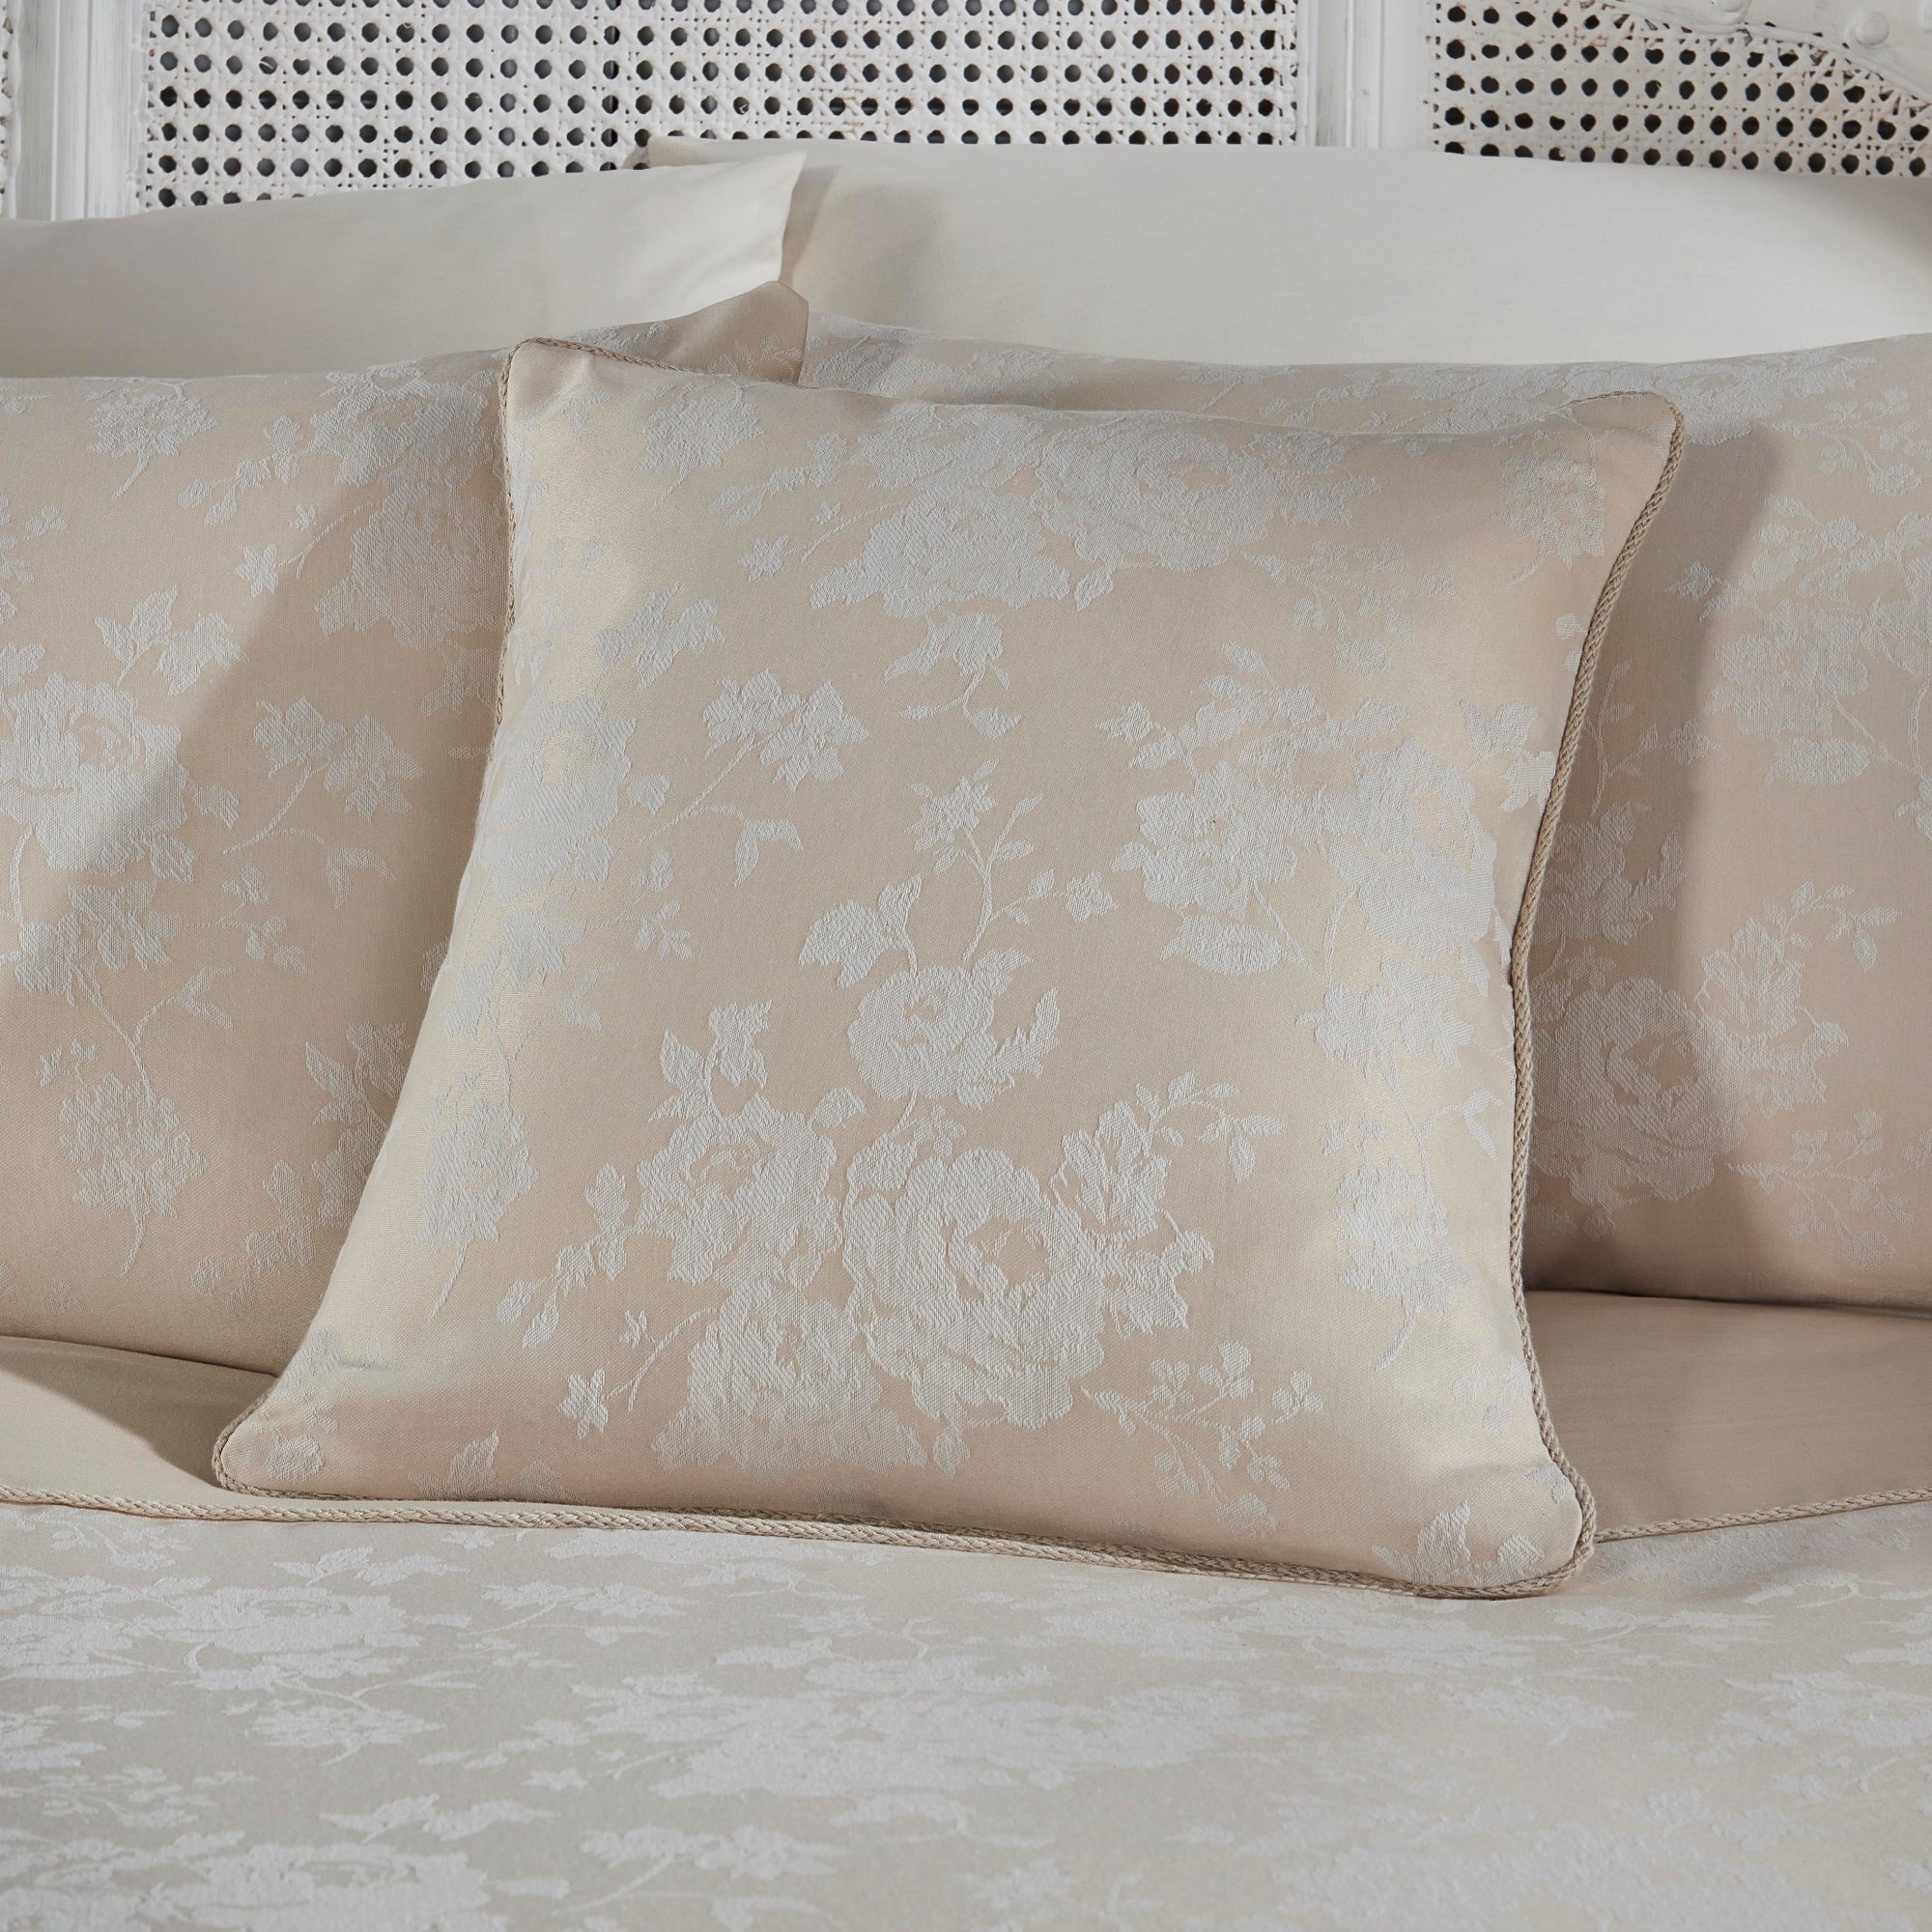 Filled Cushion Imelda by Dreams & Drapes Woven in Ivory